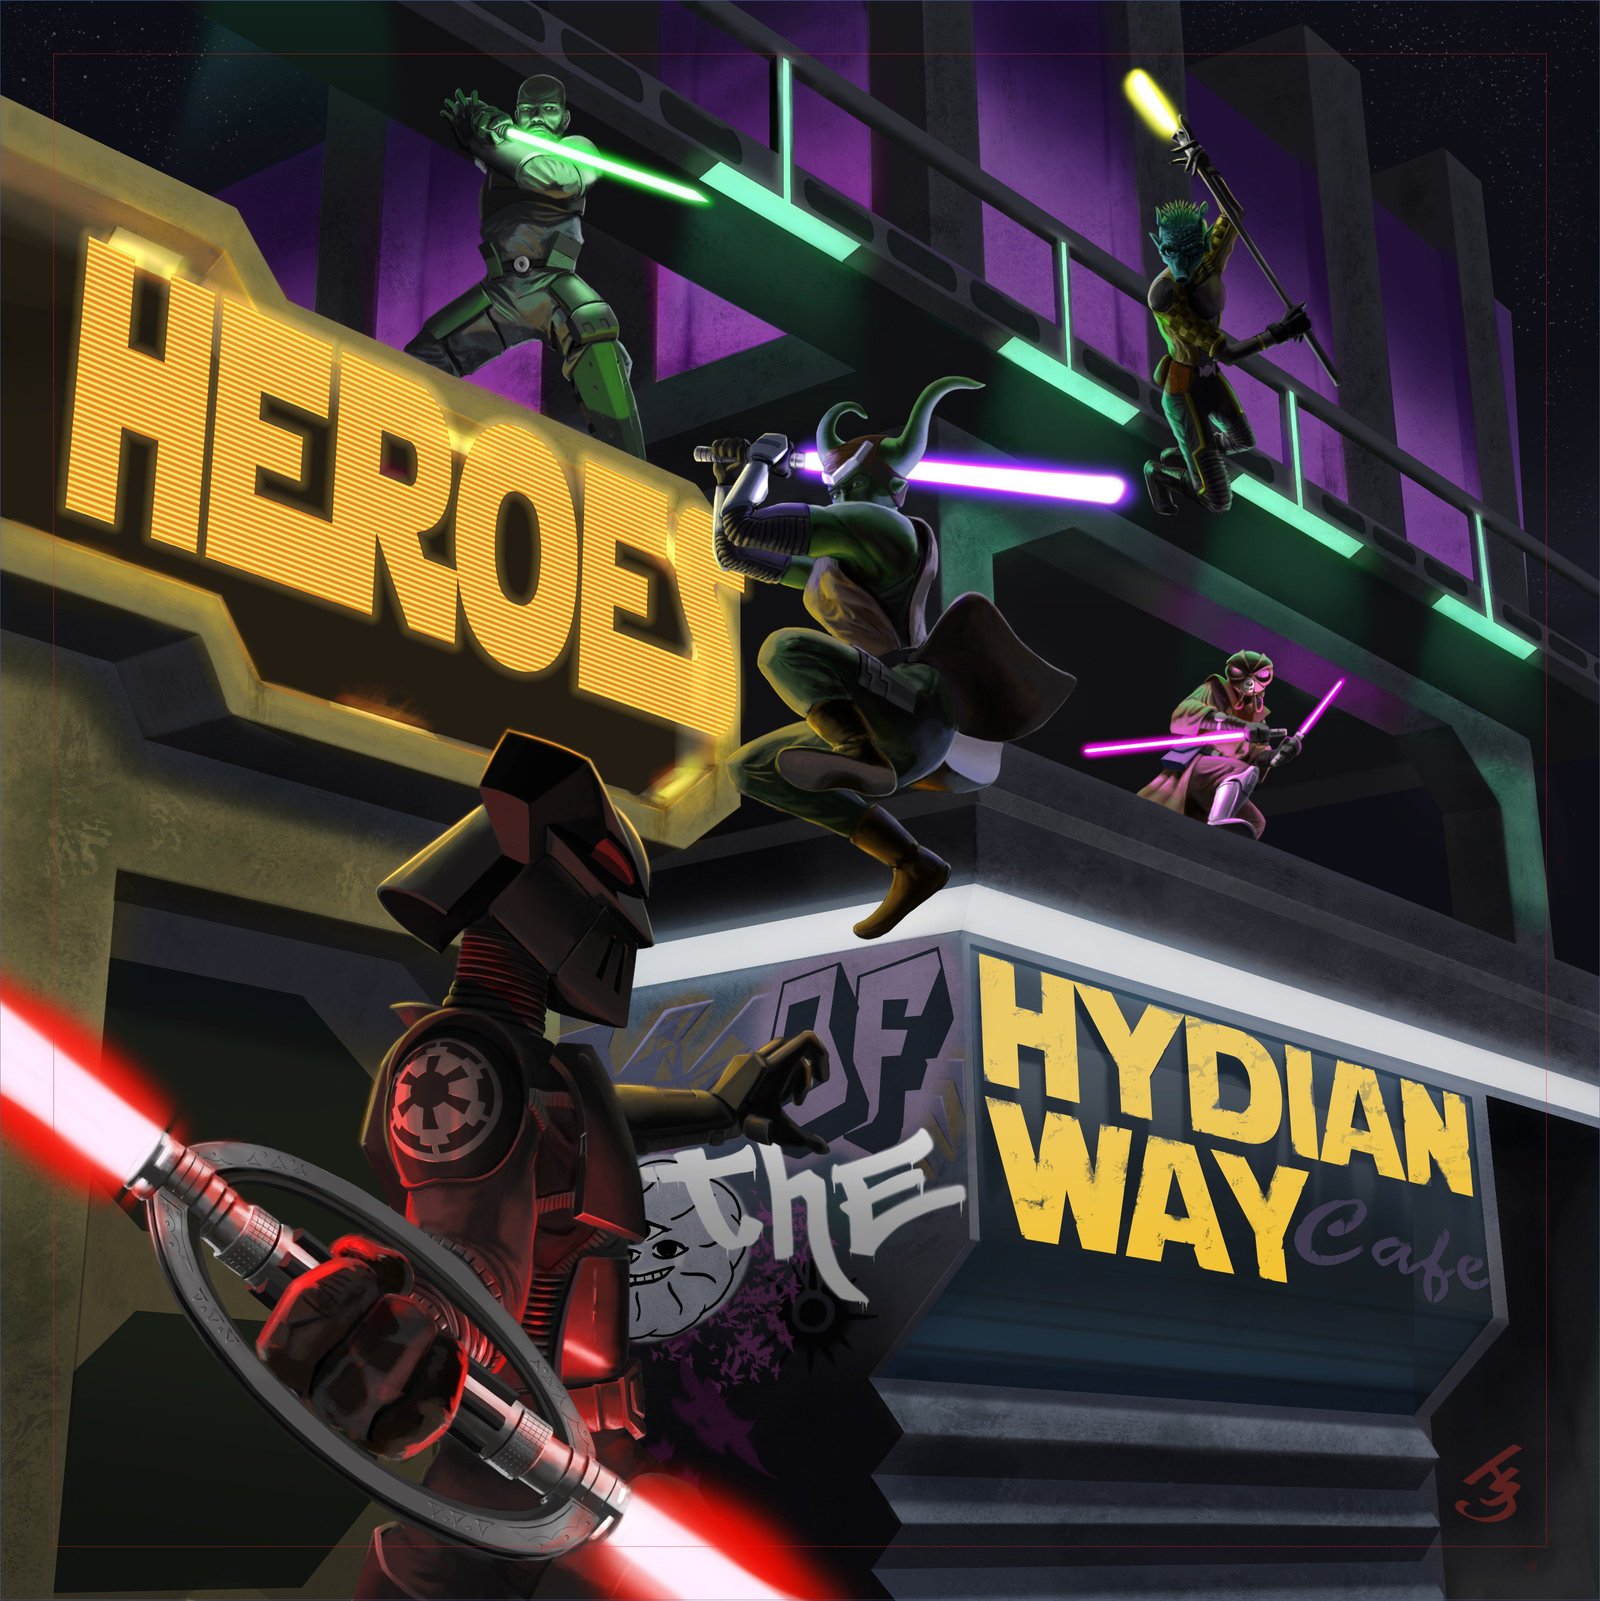 Heroes of the Hydian Way